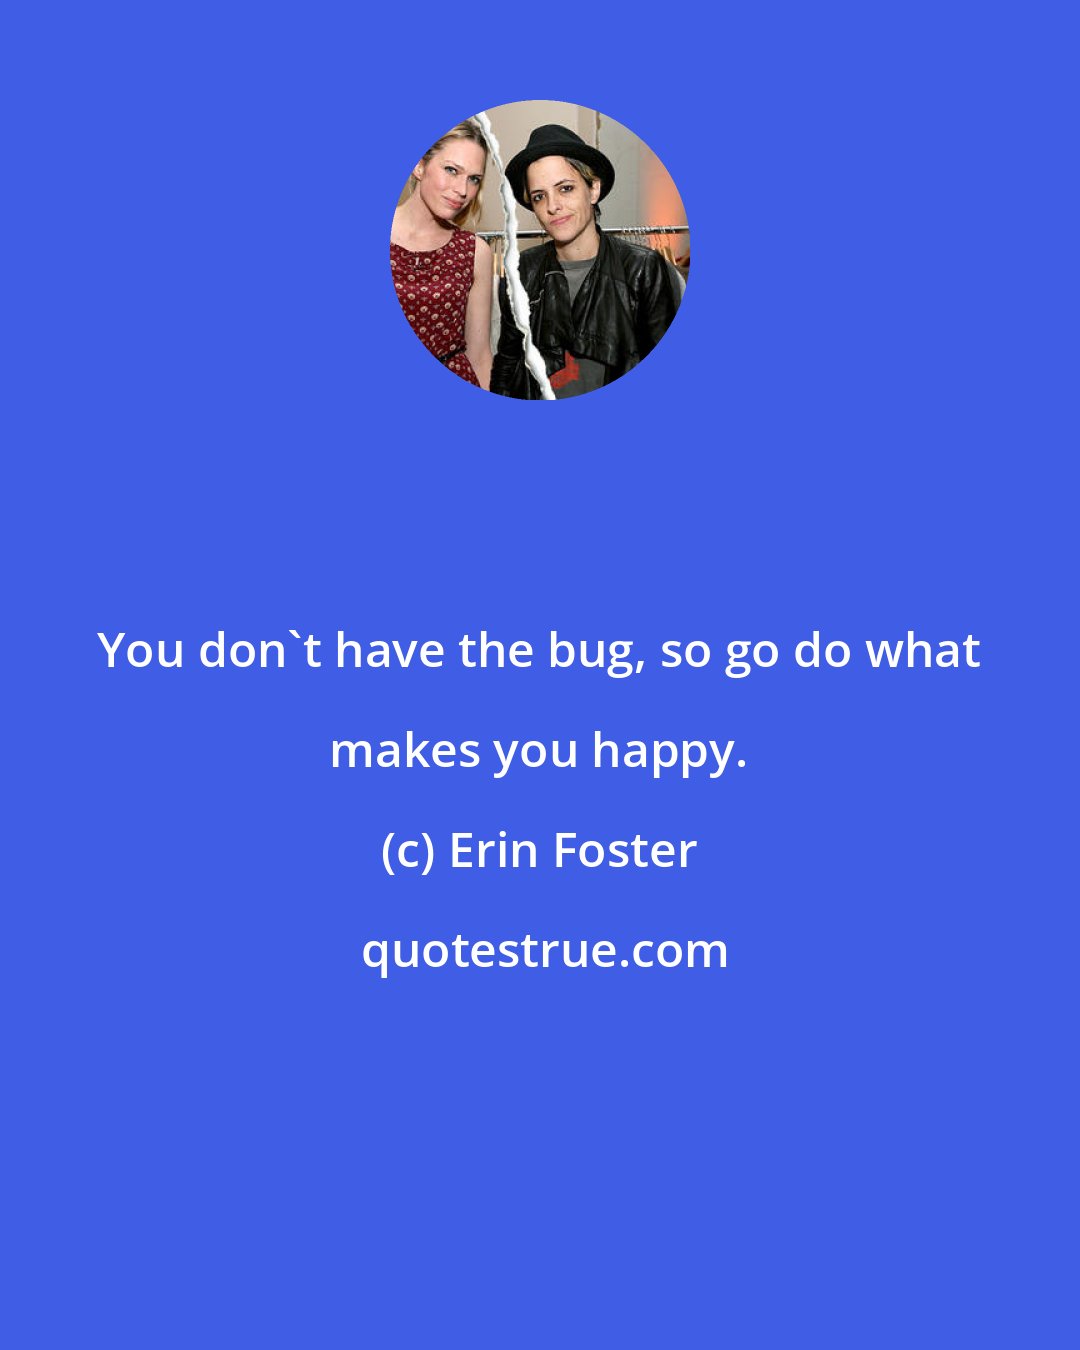 Erin Foster: You don't have the bug, so go do what makes you happy.